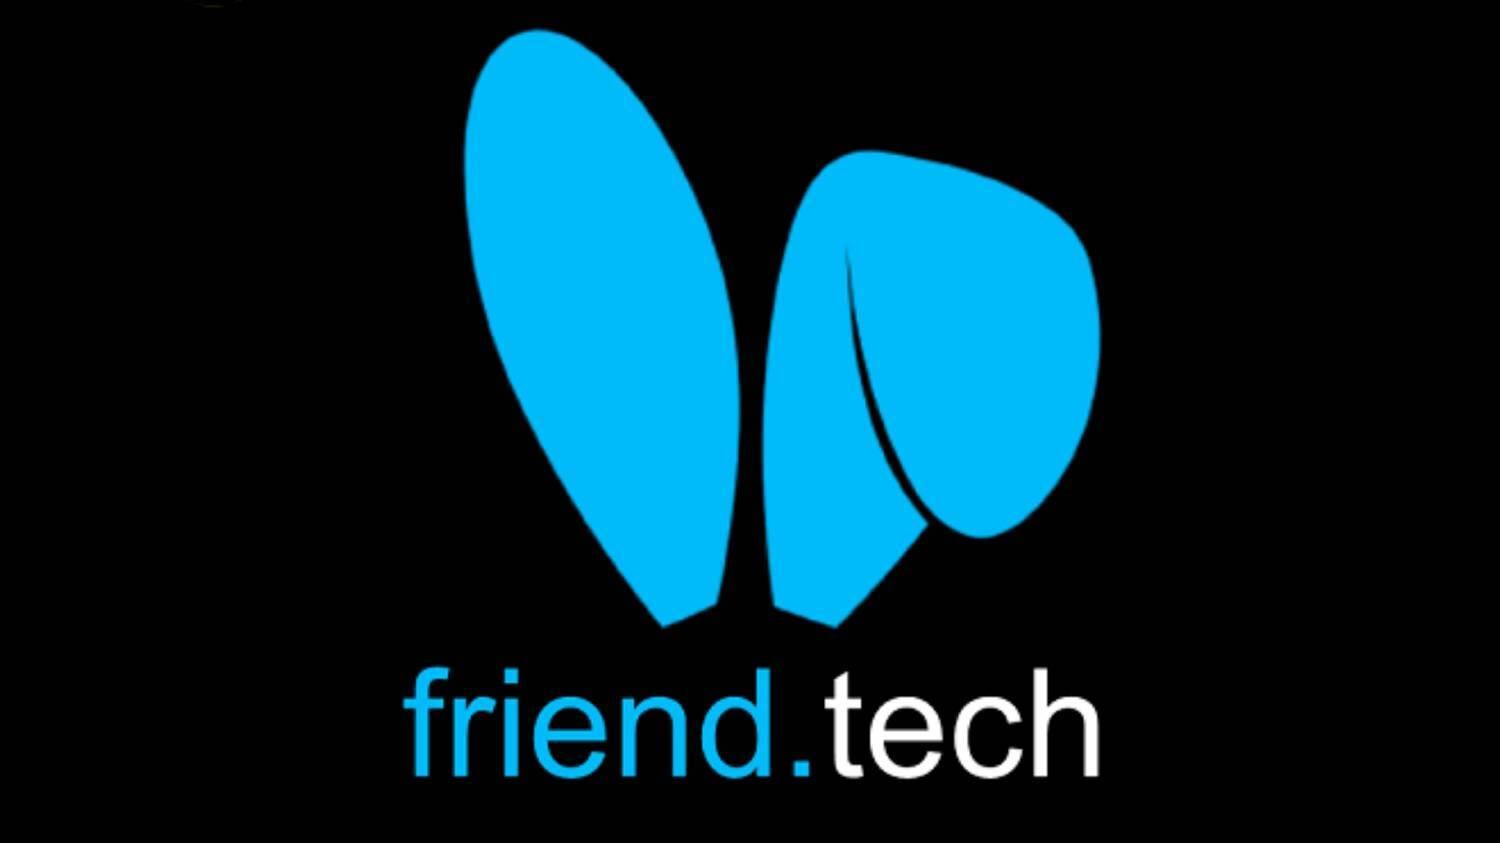 nguoi-dung-o-at-gui-tien-vao-friendtech-truoc-them-airdrop